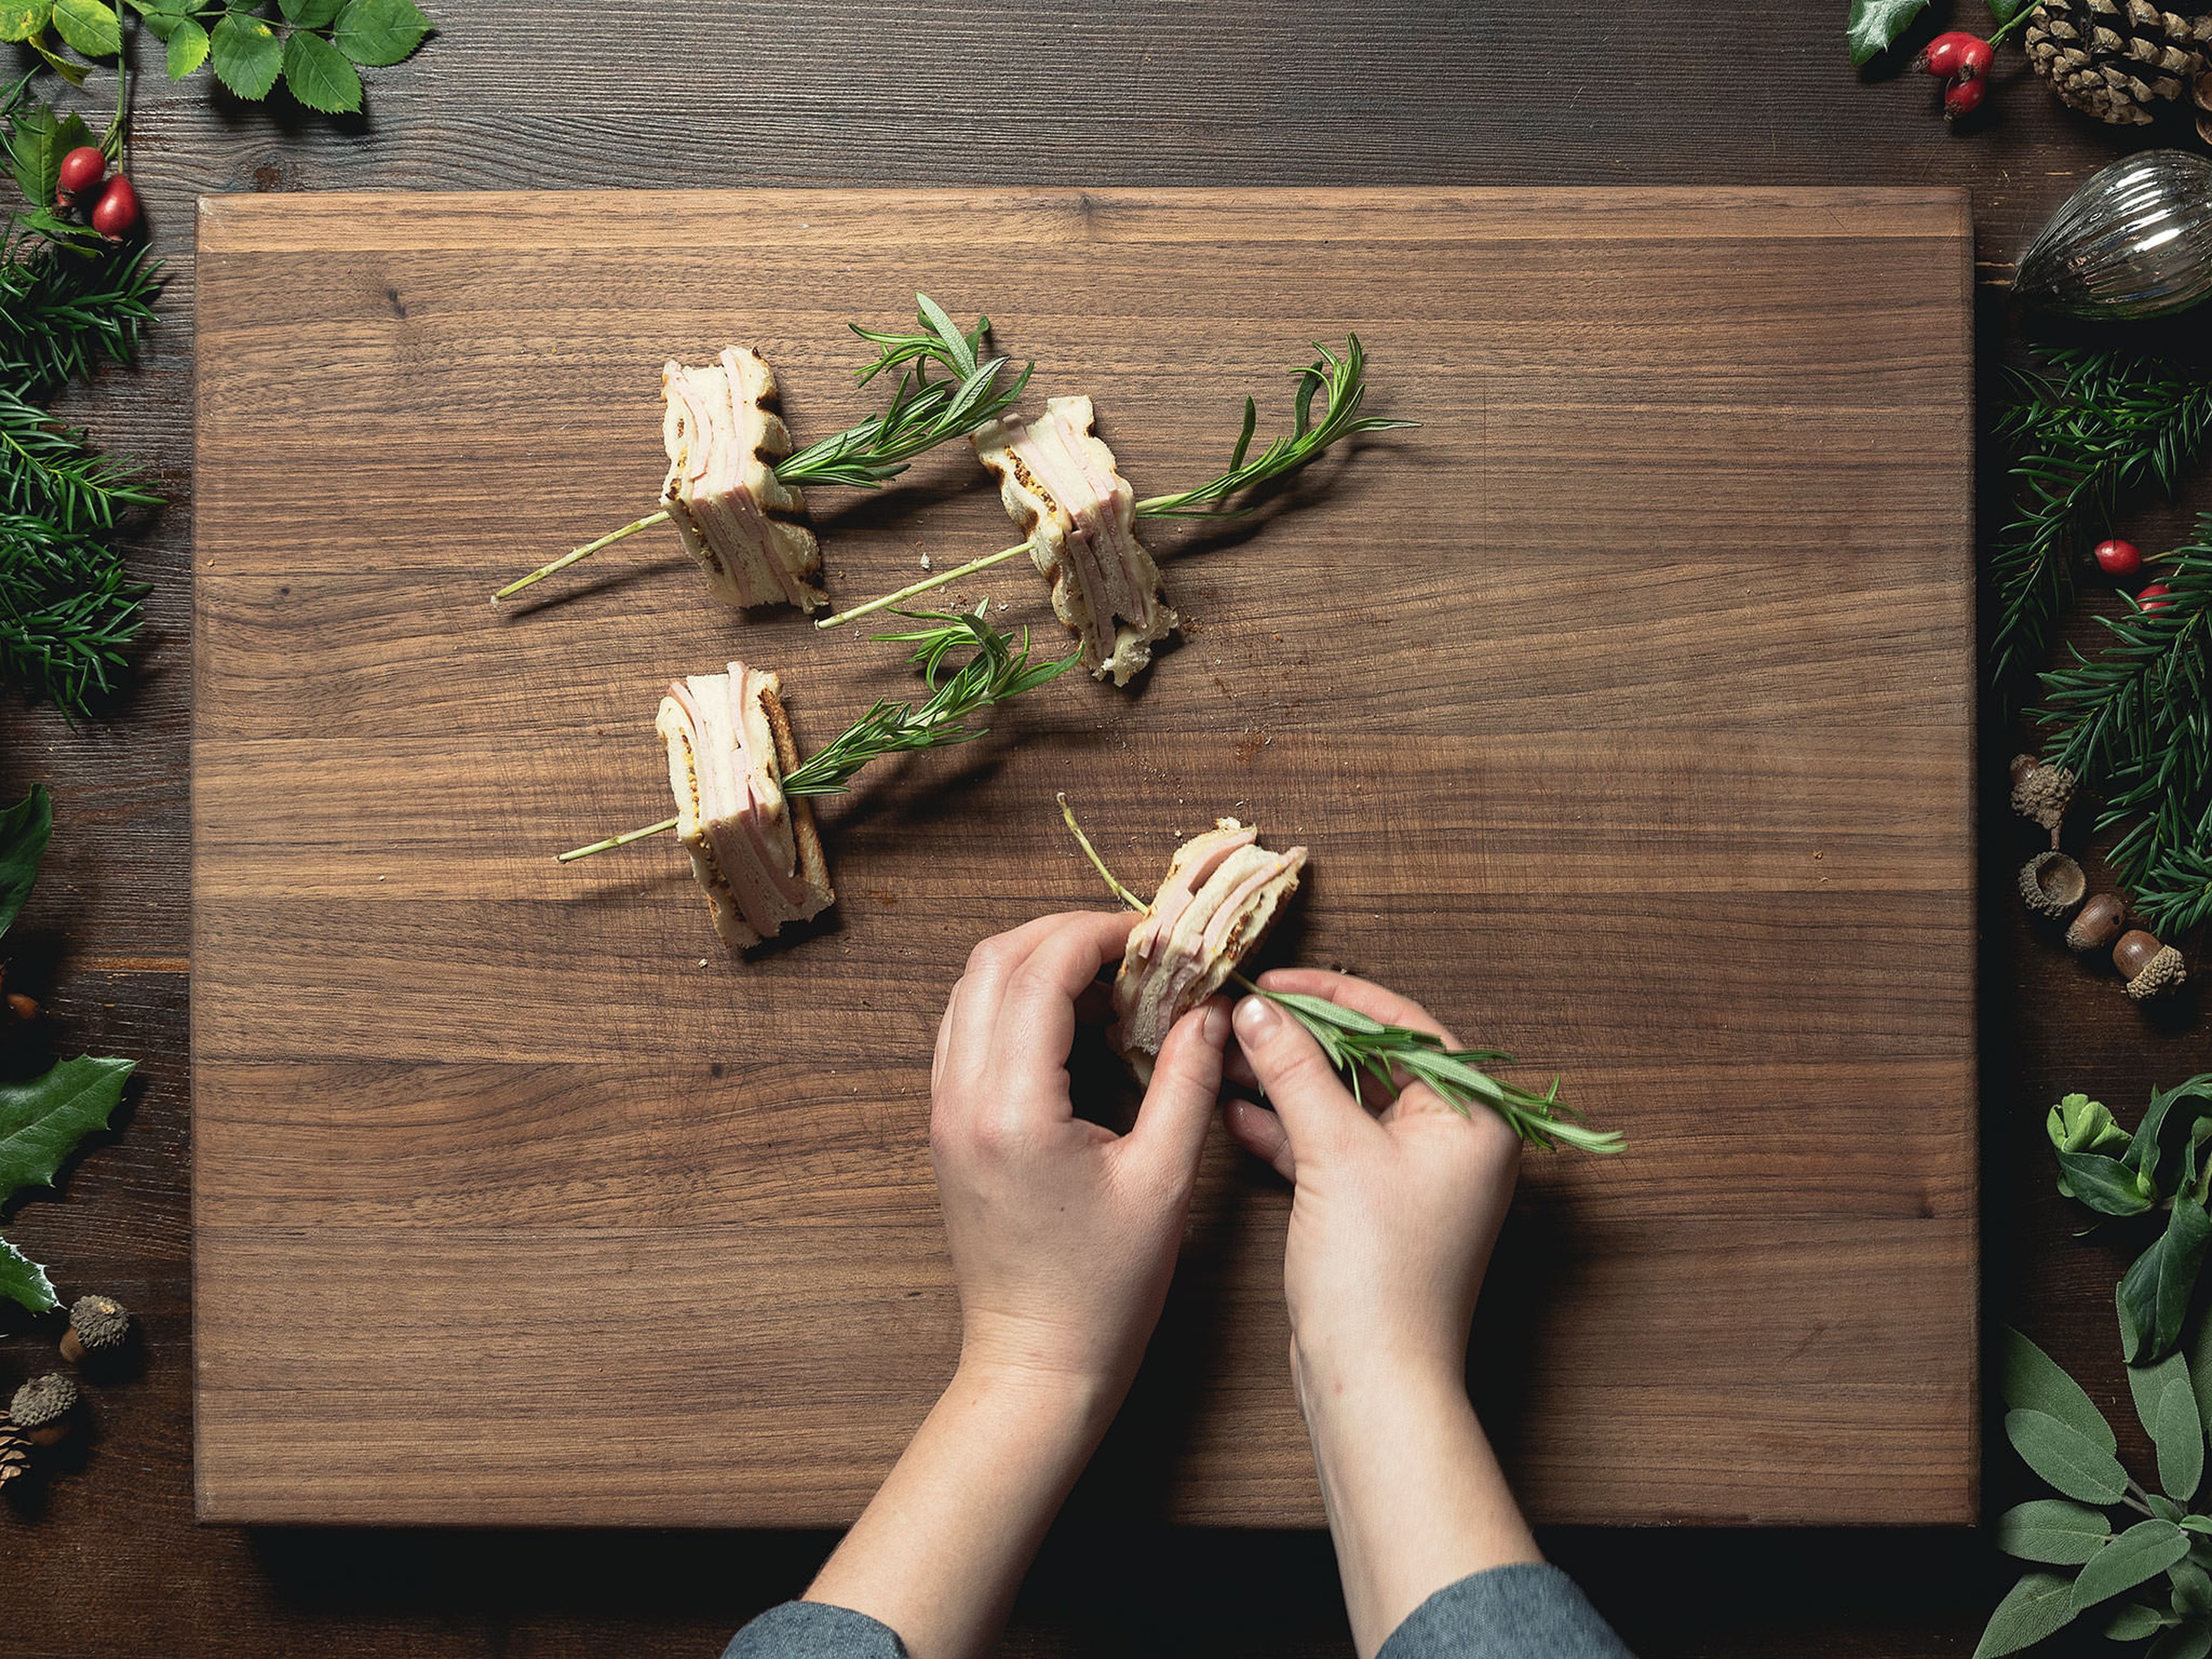 Cut each sandwich into four triangles and halve each rosemary sprig width-wise. Skewer each sandwich triangle on one rosemary sprig. Enjoy as an appetizer!